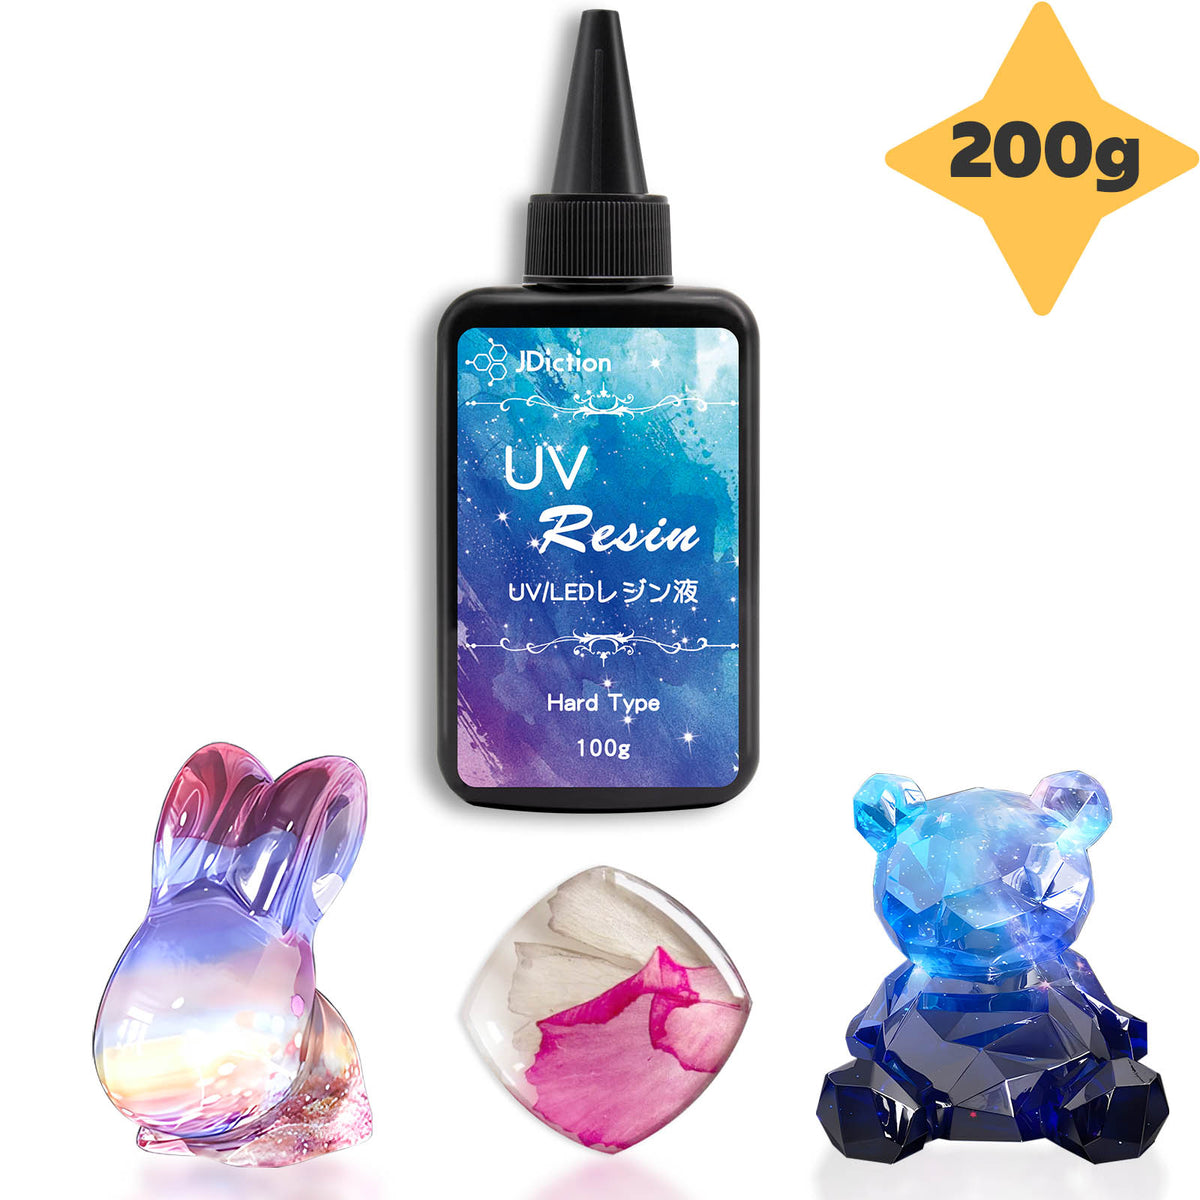 JDiction UV Resin, Upgrade 300g High Viscosity Hard UV Resin with Crystal Clear Resin Kit for Doming, Sealing, Coating, and Casting